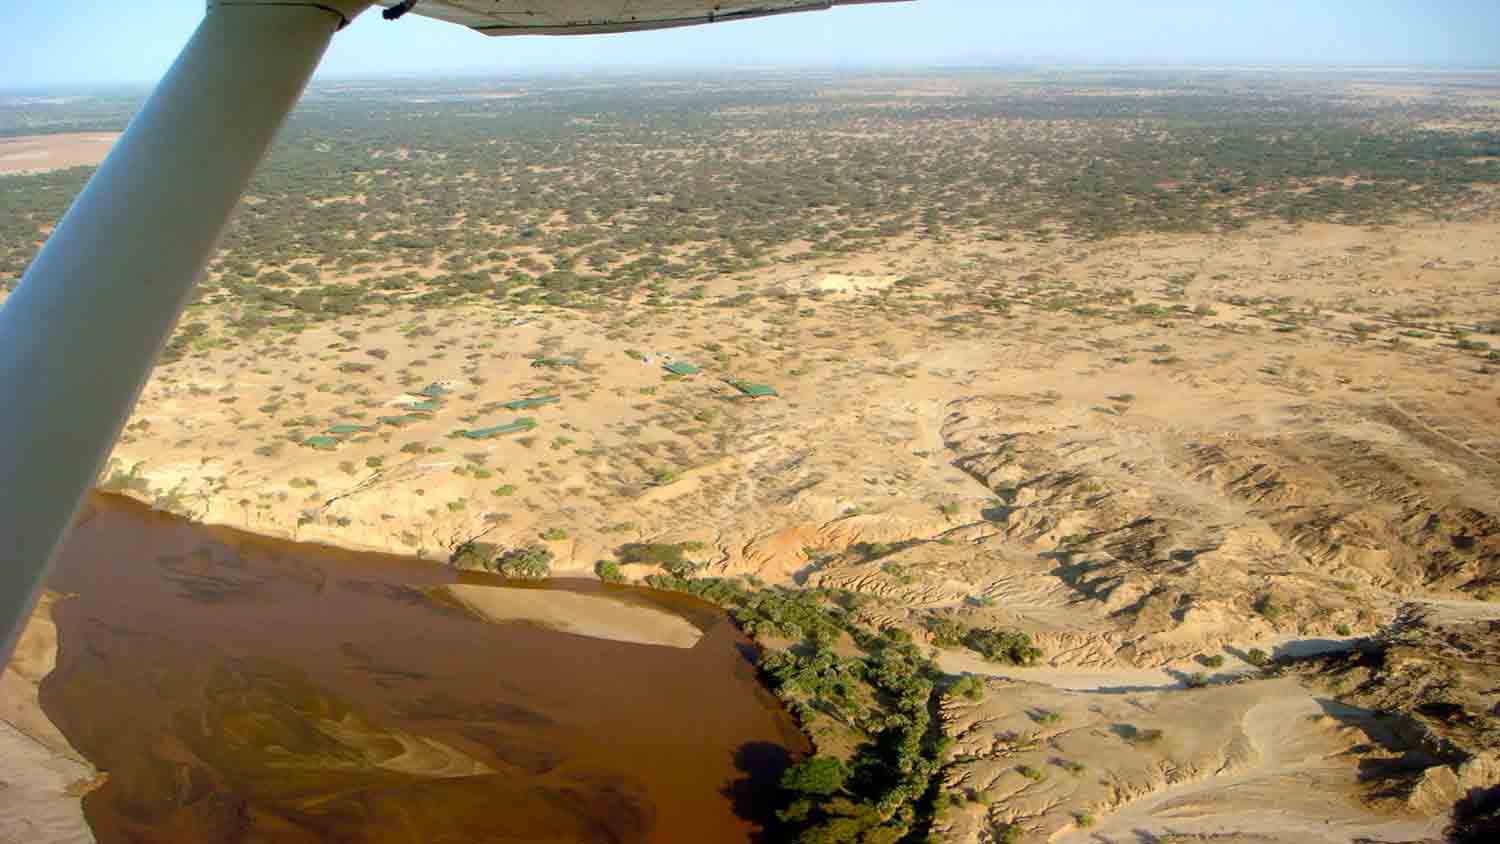 turkana-basin-institute-view-from-the-air